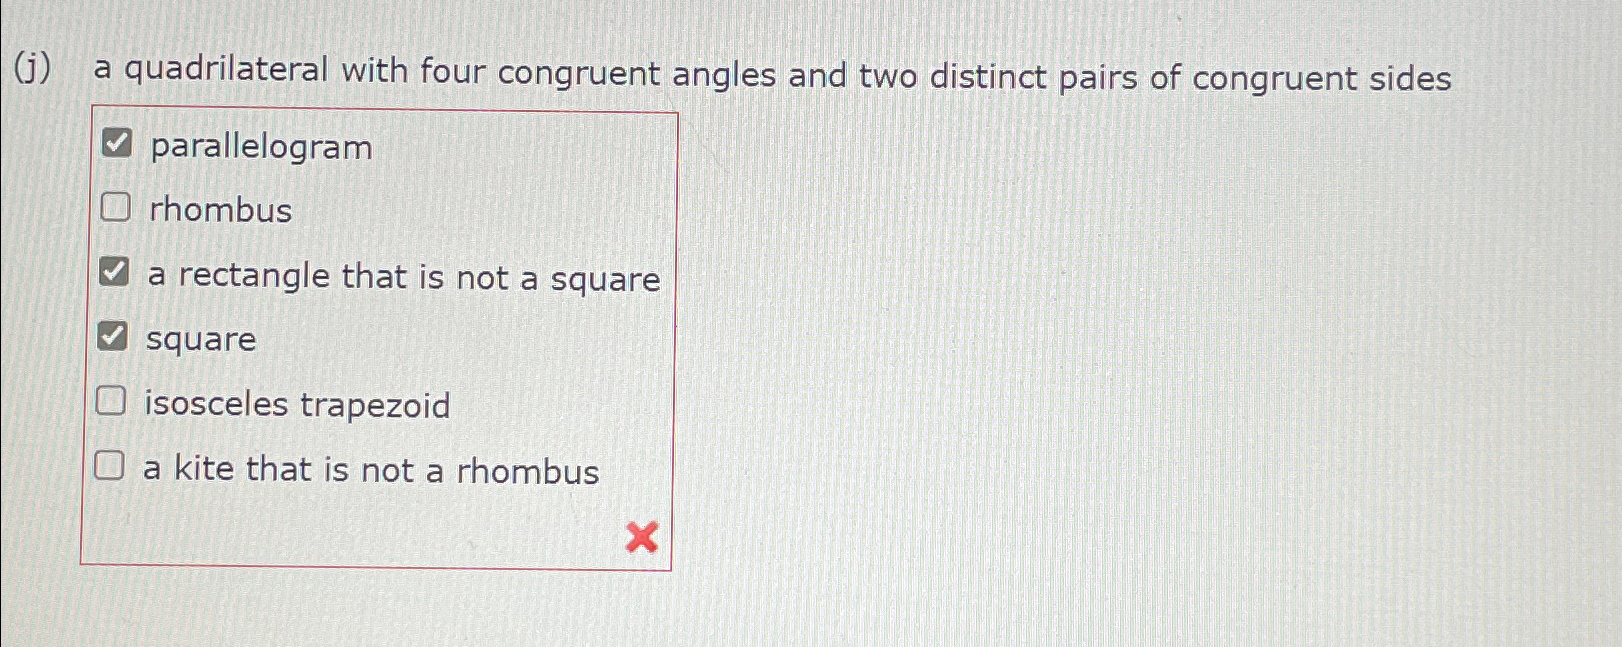 What quadrilateral has two pairs of congruent sides, not including